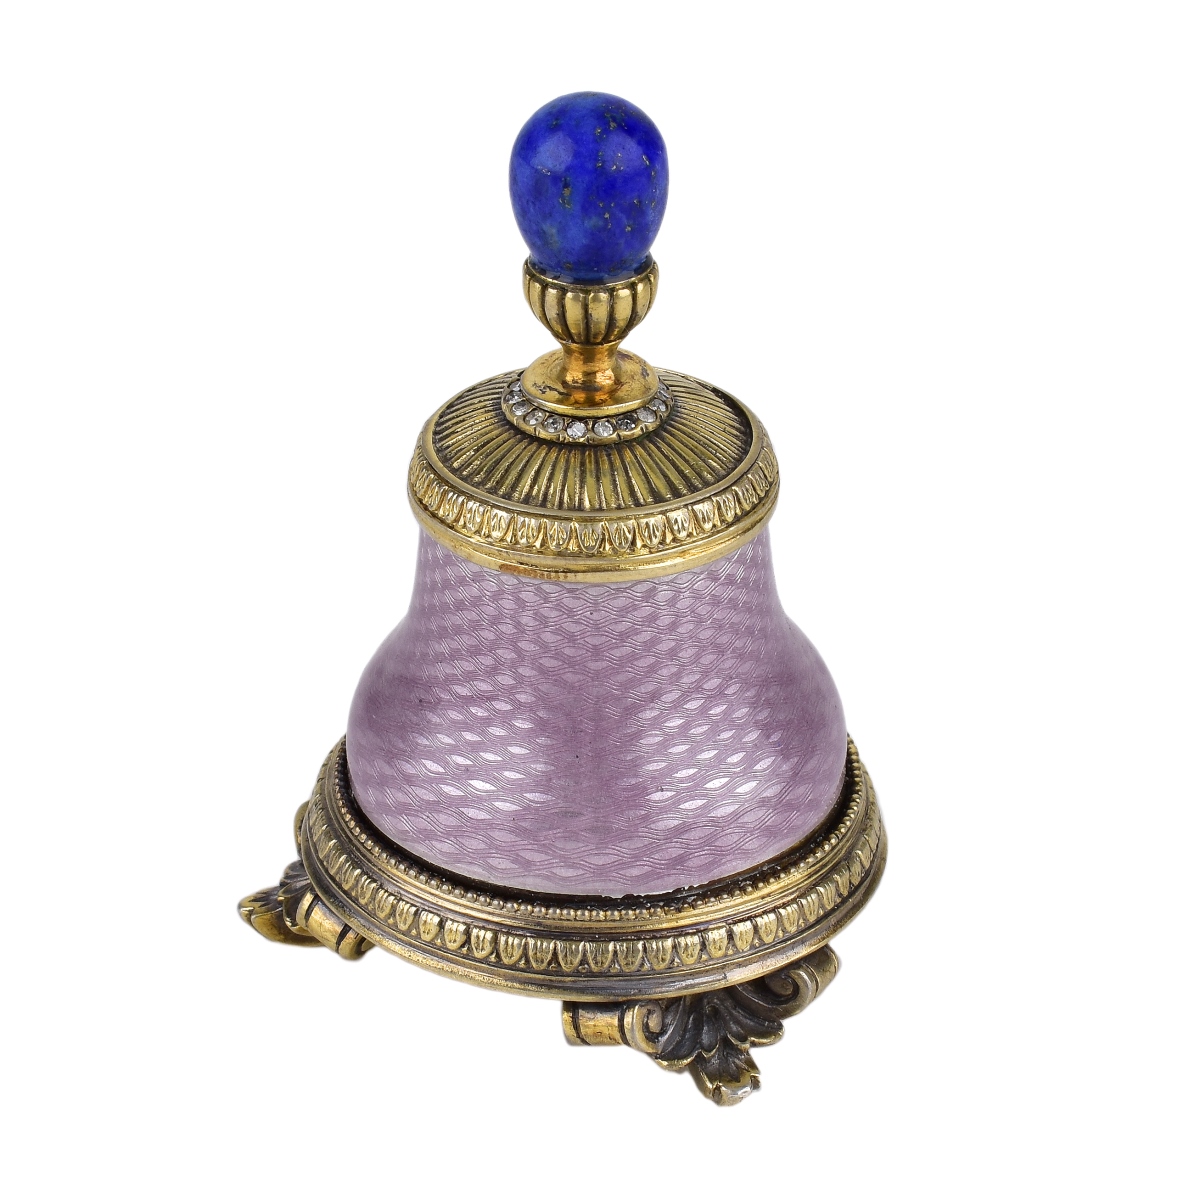 Faberge Style Guilloche Enamel and Silver Gum Pot